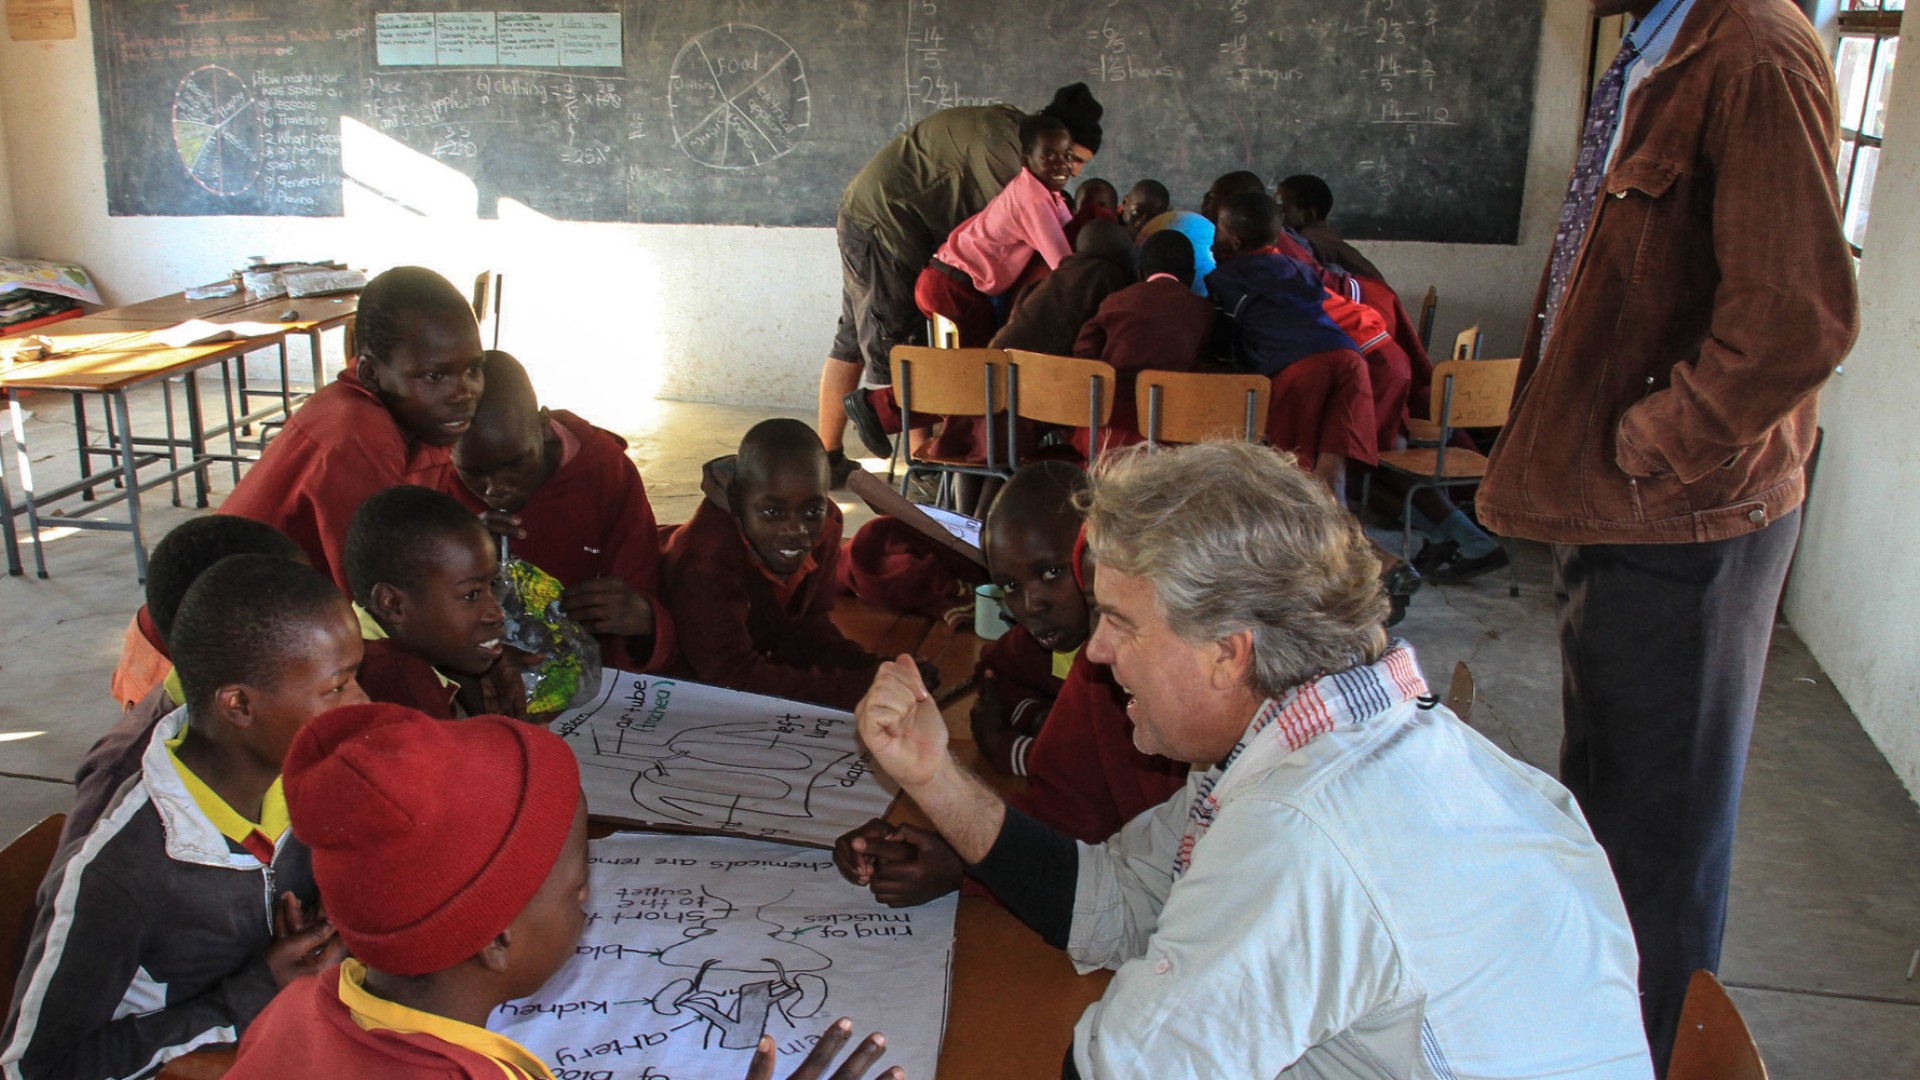 An older man talking to a group of kids around a table with paper on it at a small school in Zimbabwe